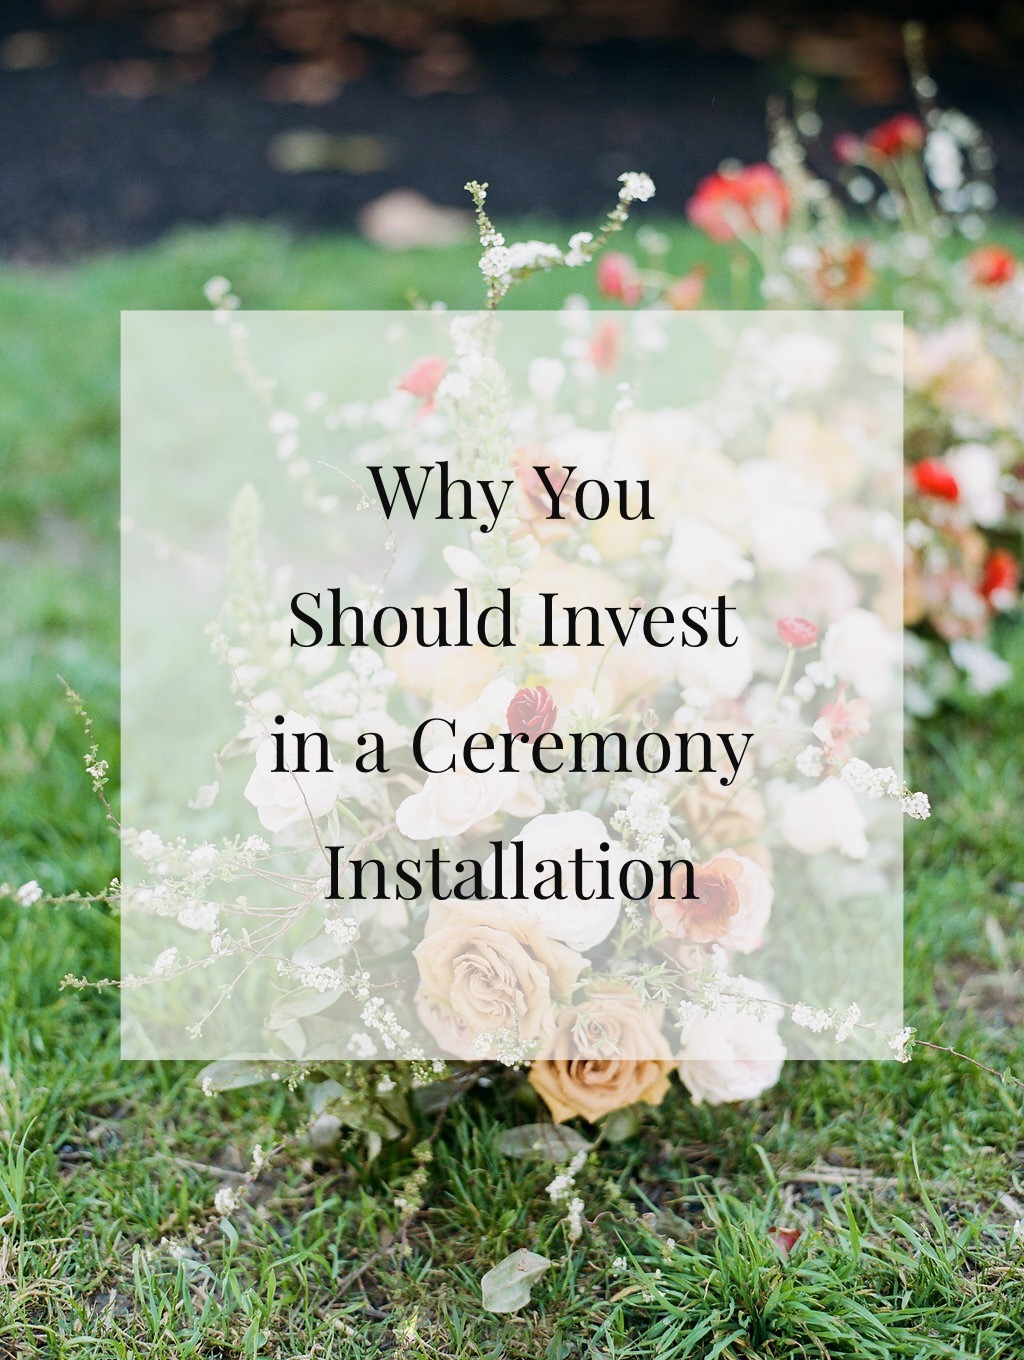 Why You Should Invest in a Ceremony Installation